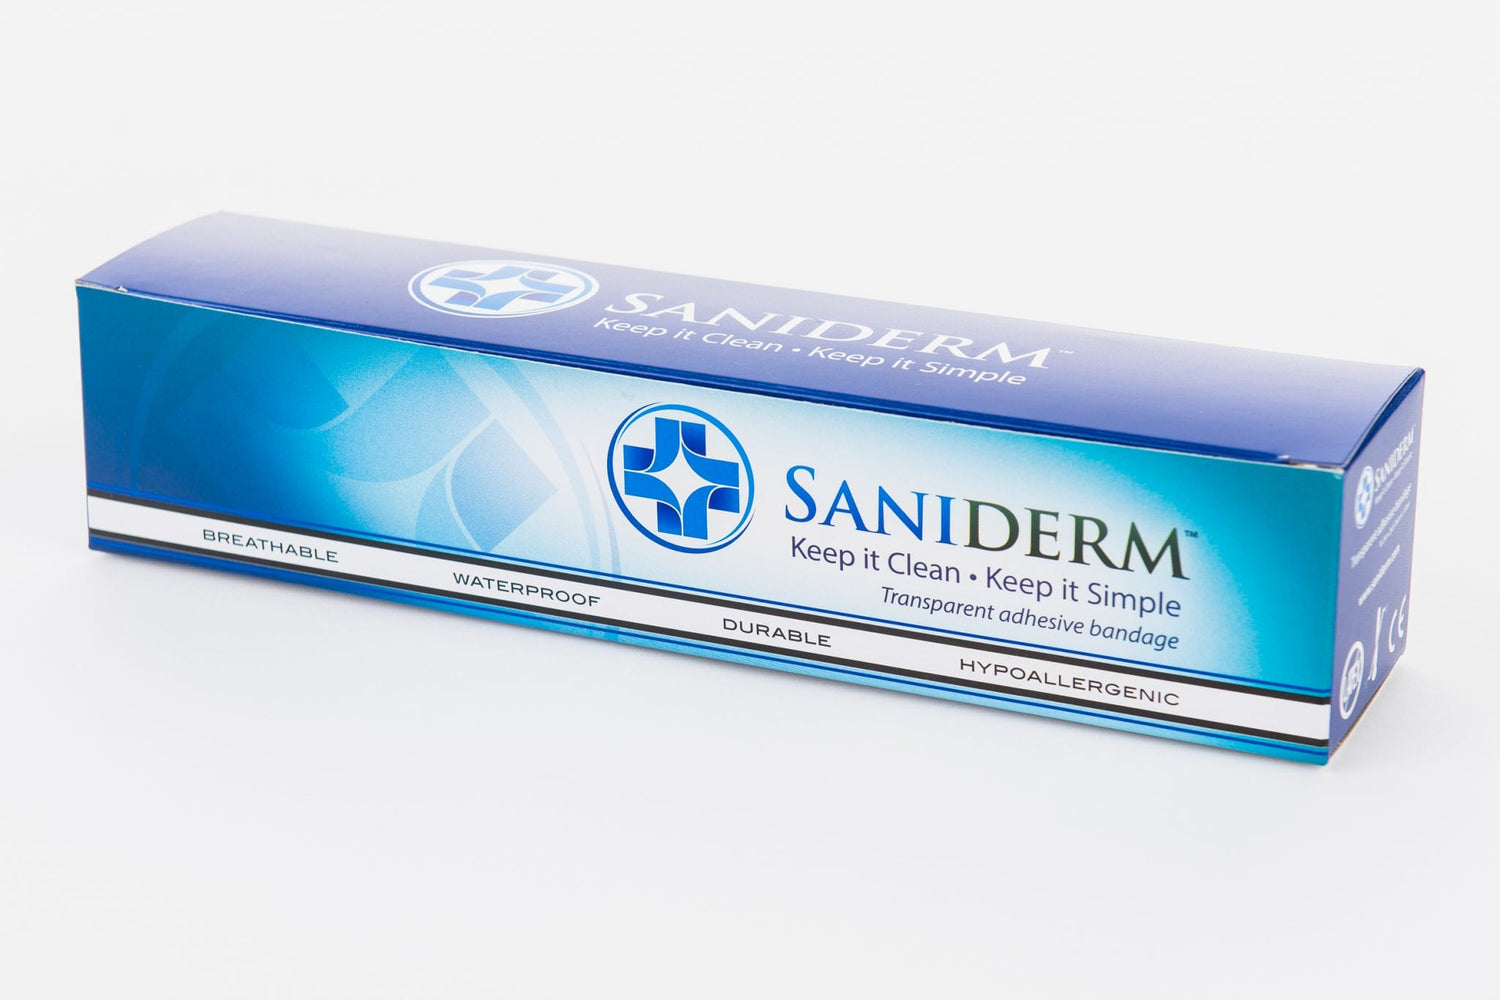 Saniderm Tattoo Aftercare Personal Pack